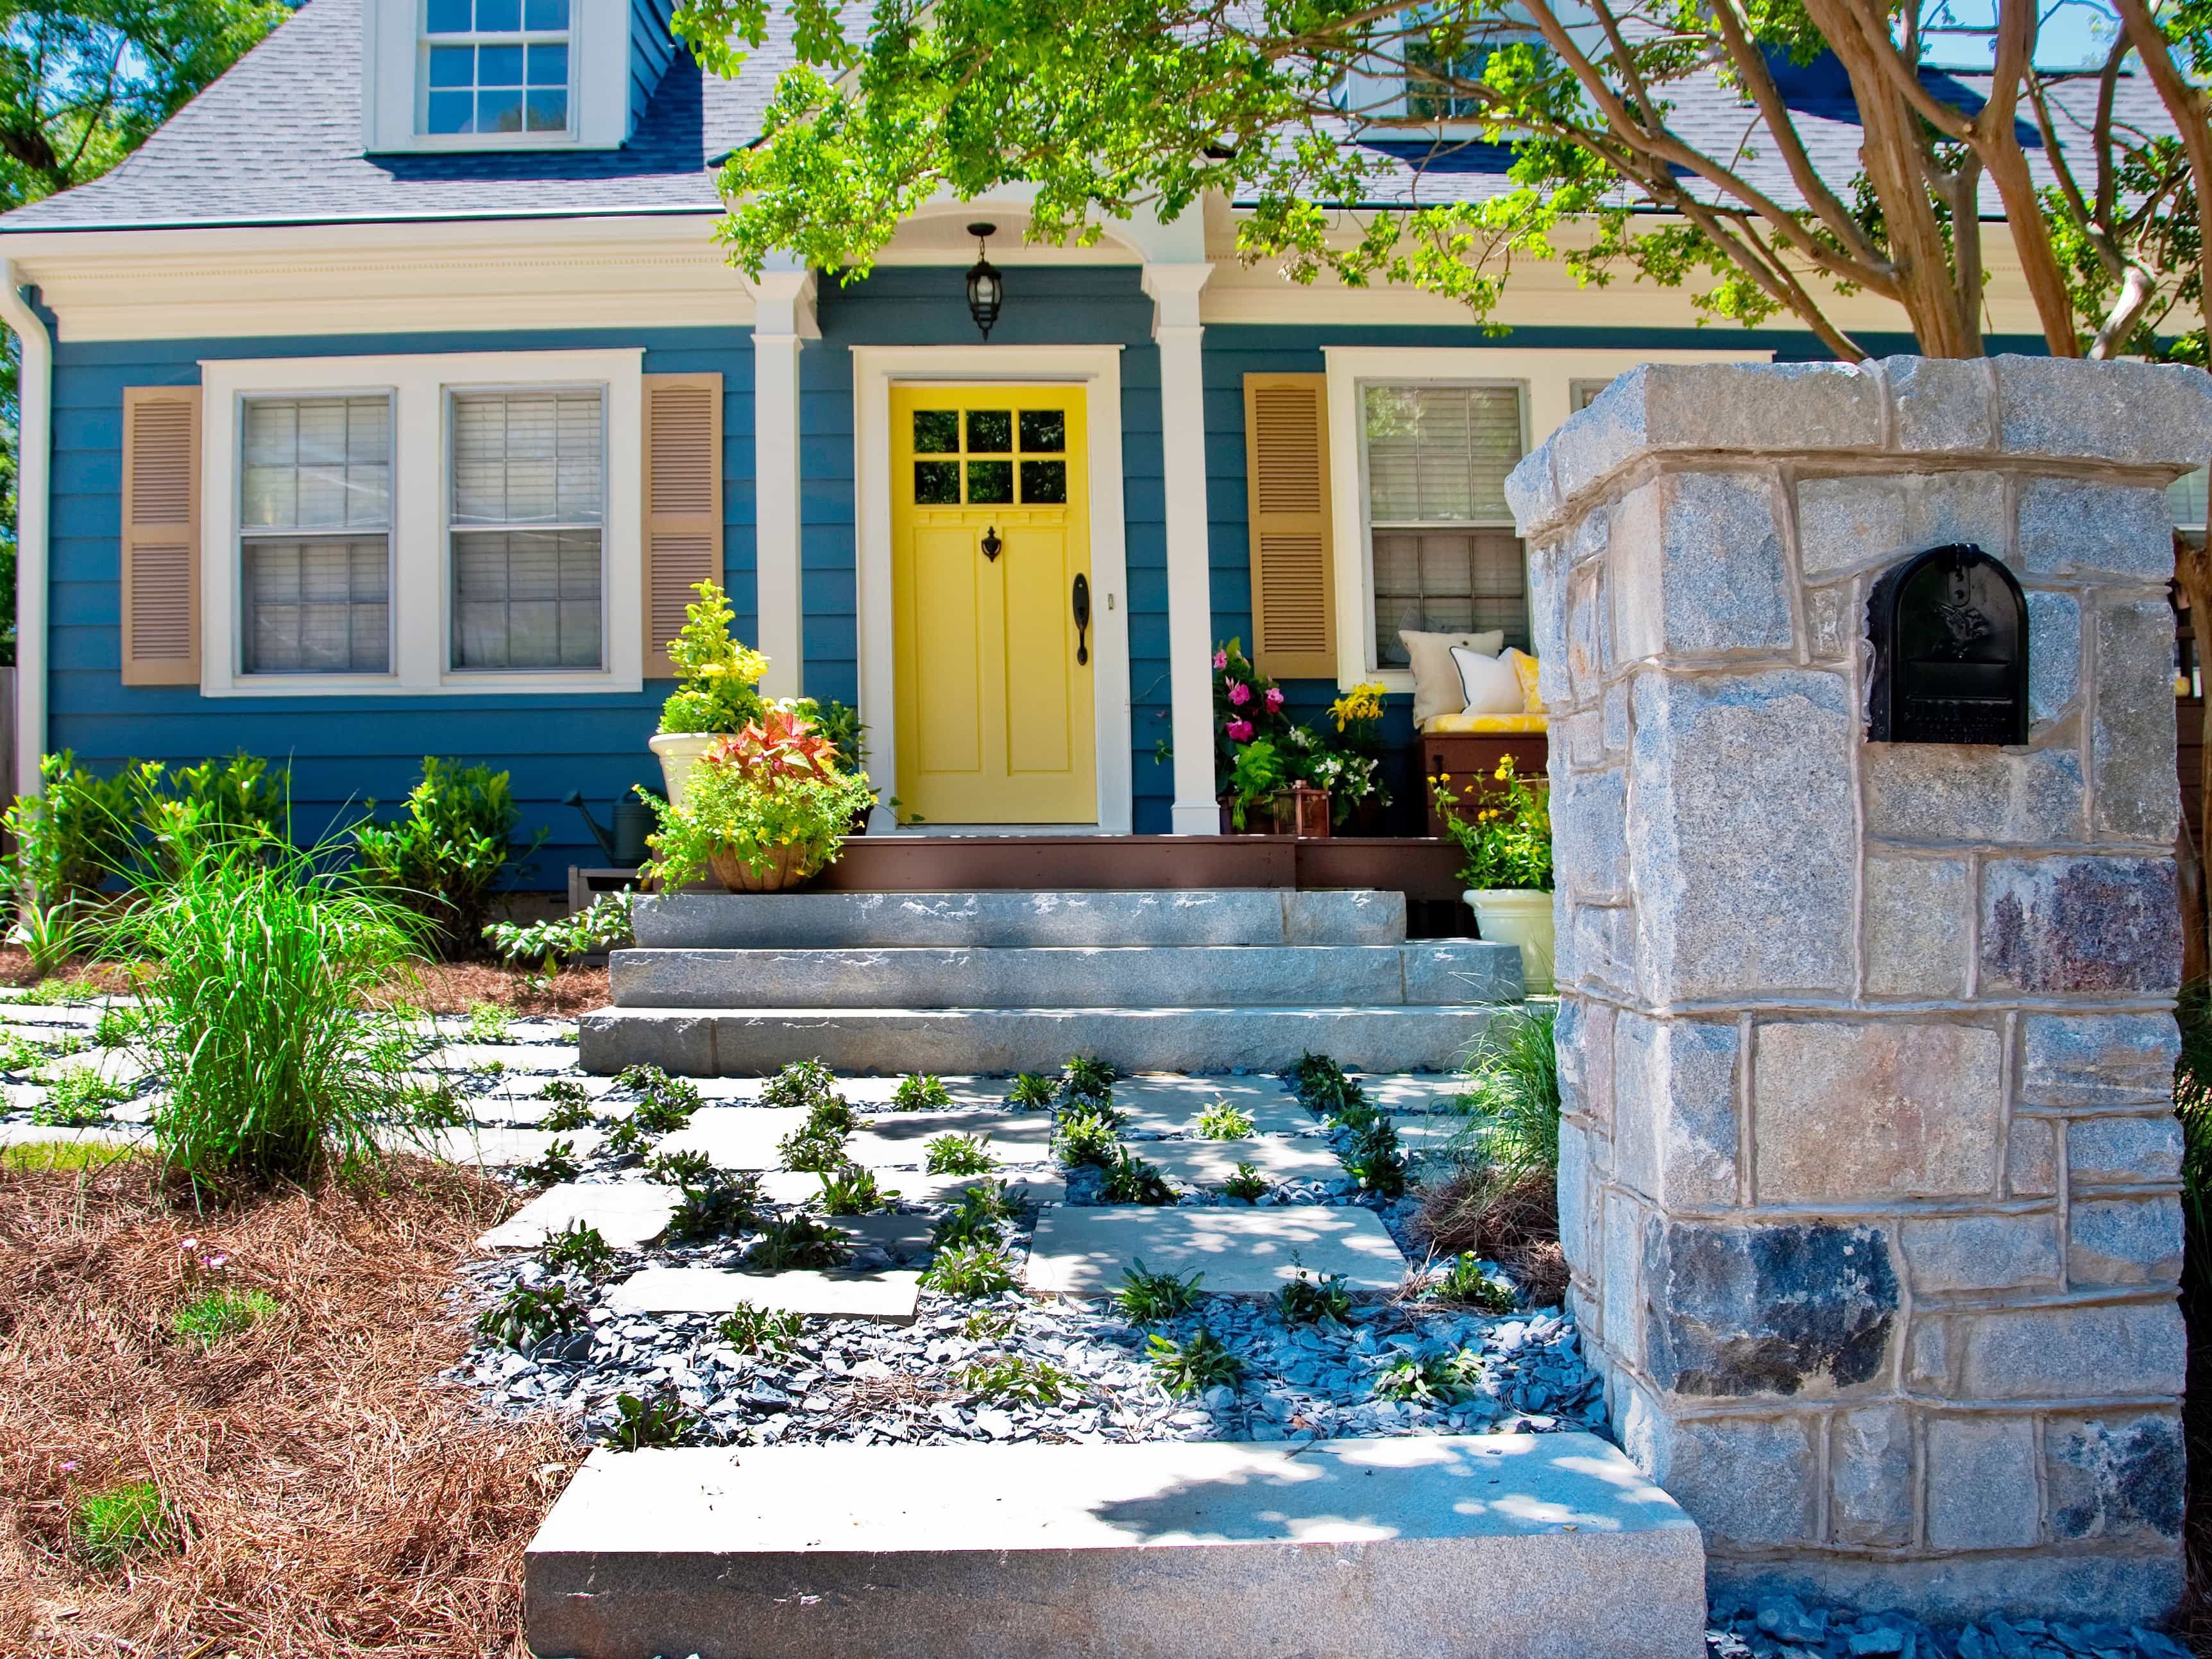 Featured Photo of Blue Cape Cod Style Home With Yellow Front Door